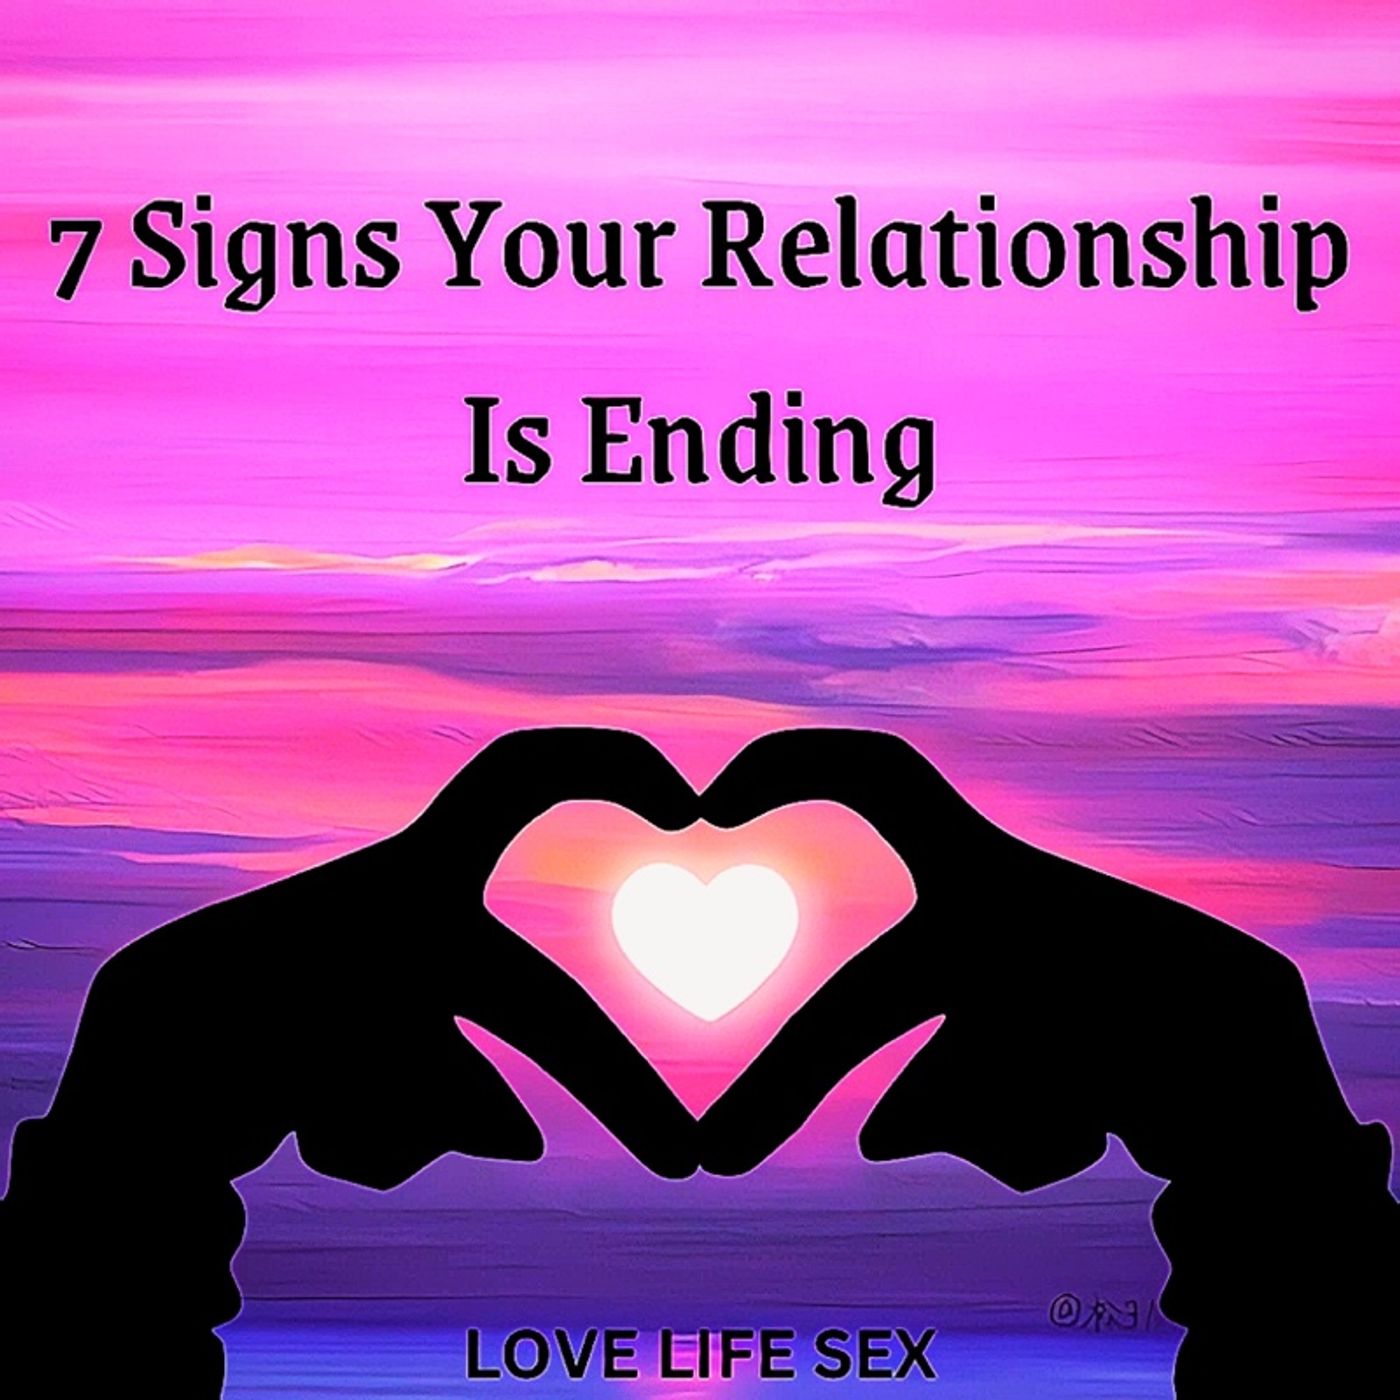 7 Signs Your Relationship Is Ending 💔